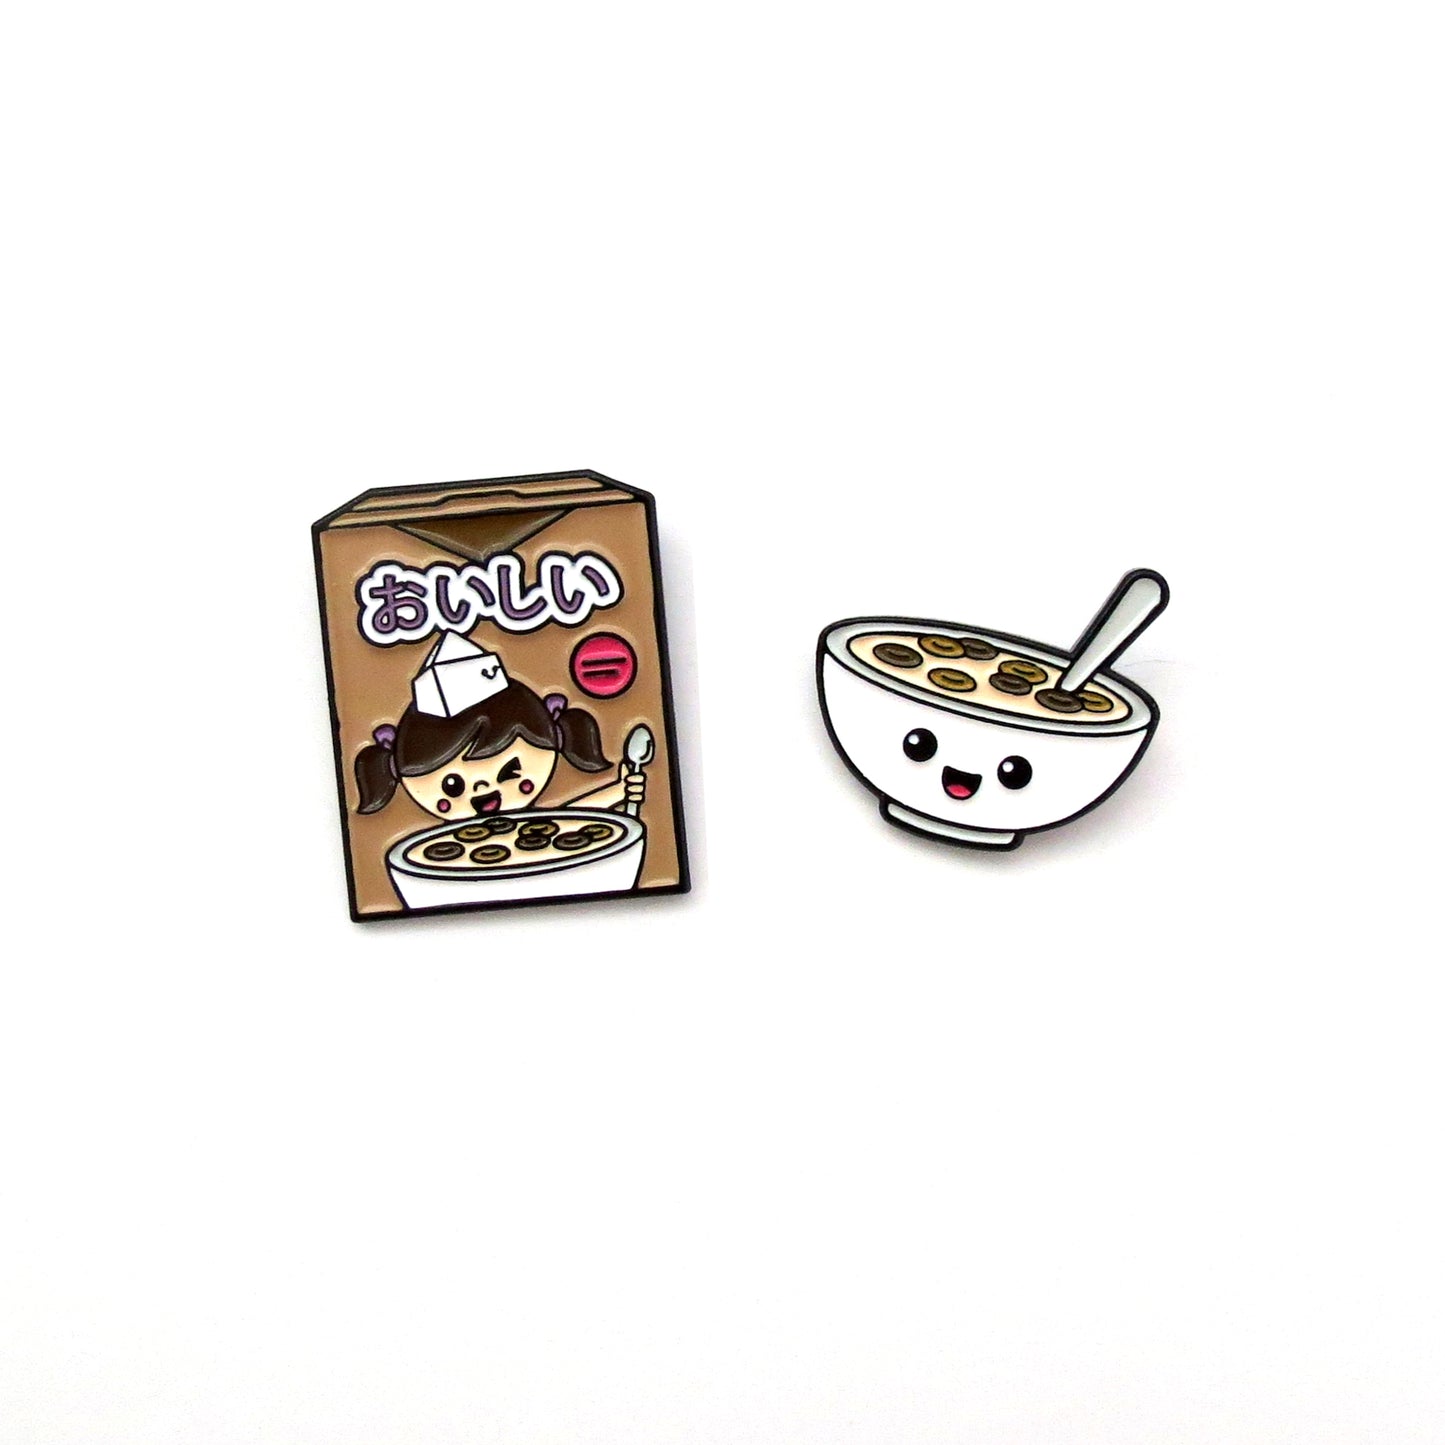 Cocoa Cereal Box and Cereal Bowl enamel pins on white background